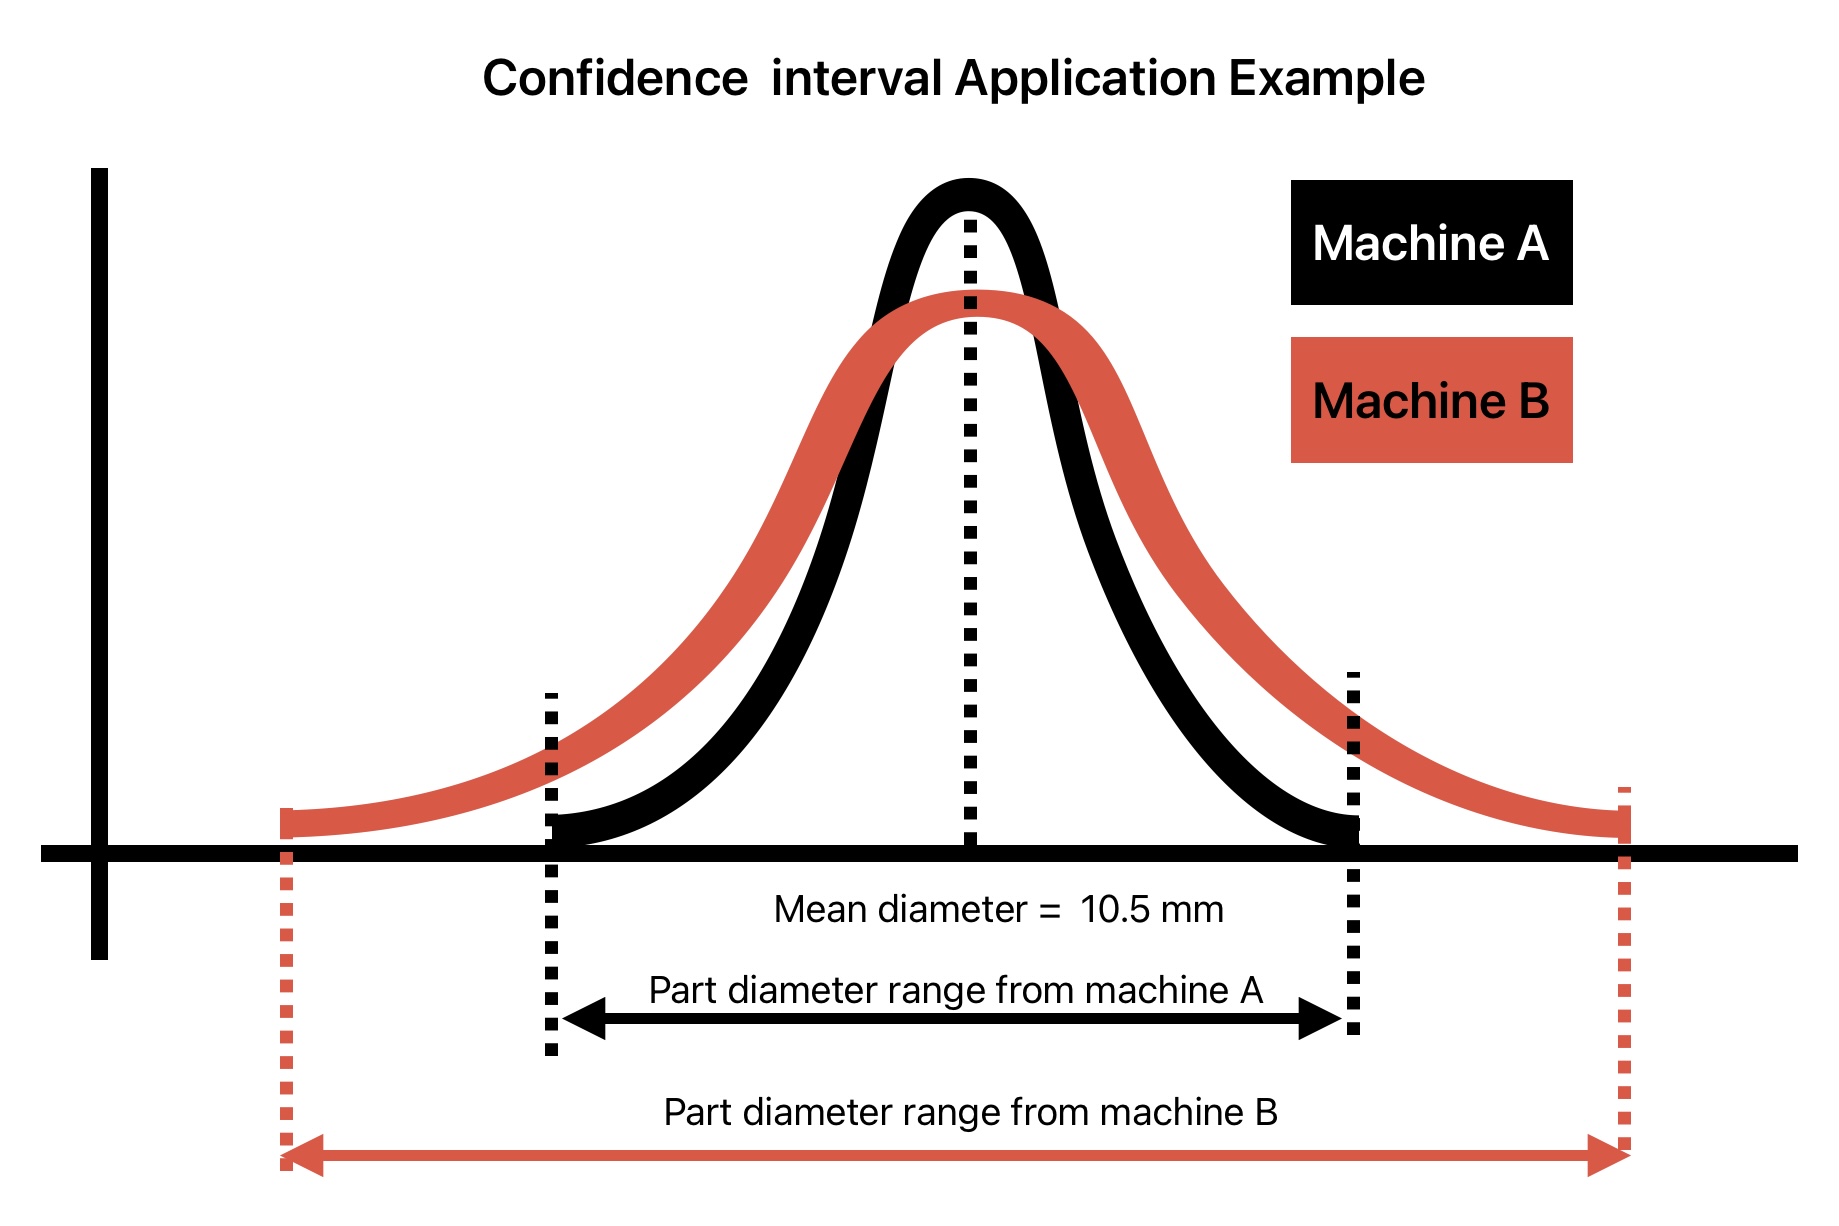 This image shows application example of confidence interval in manufacturing industry.